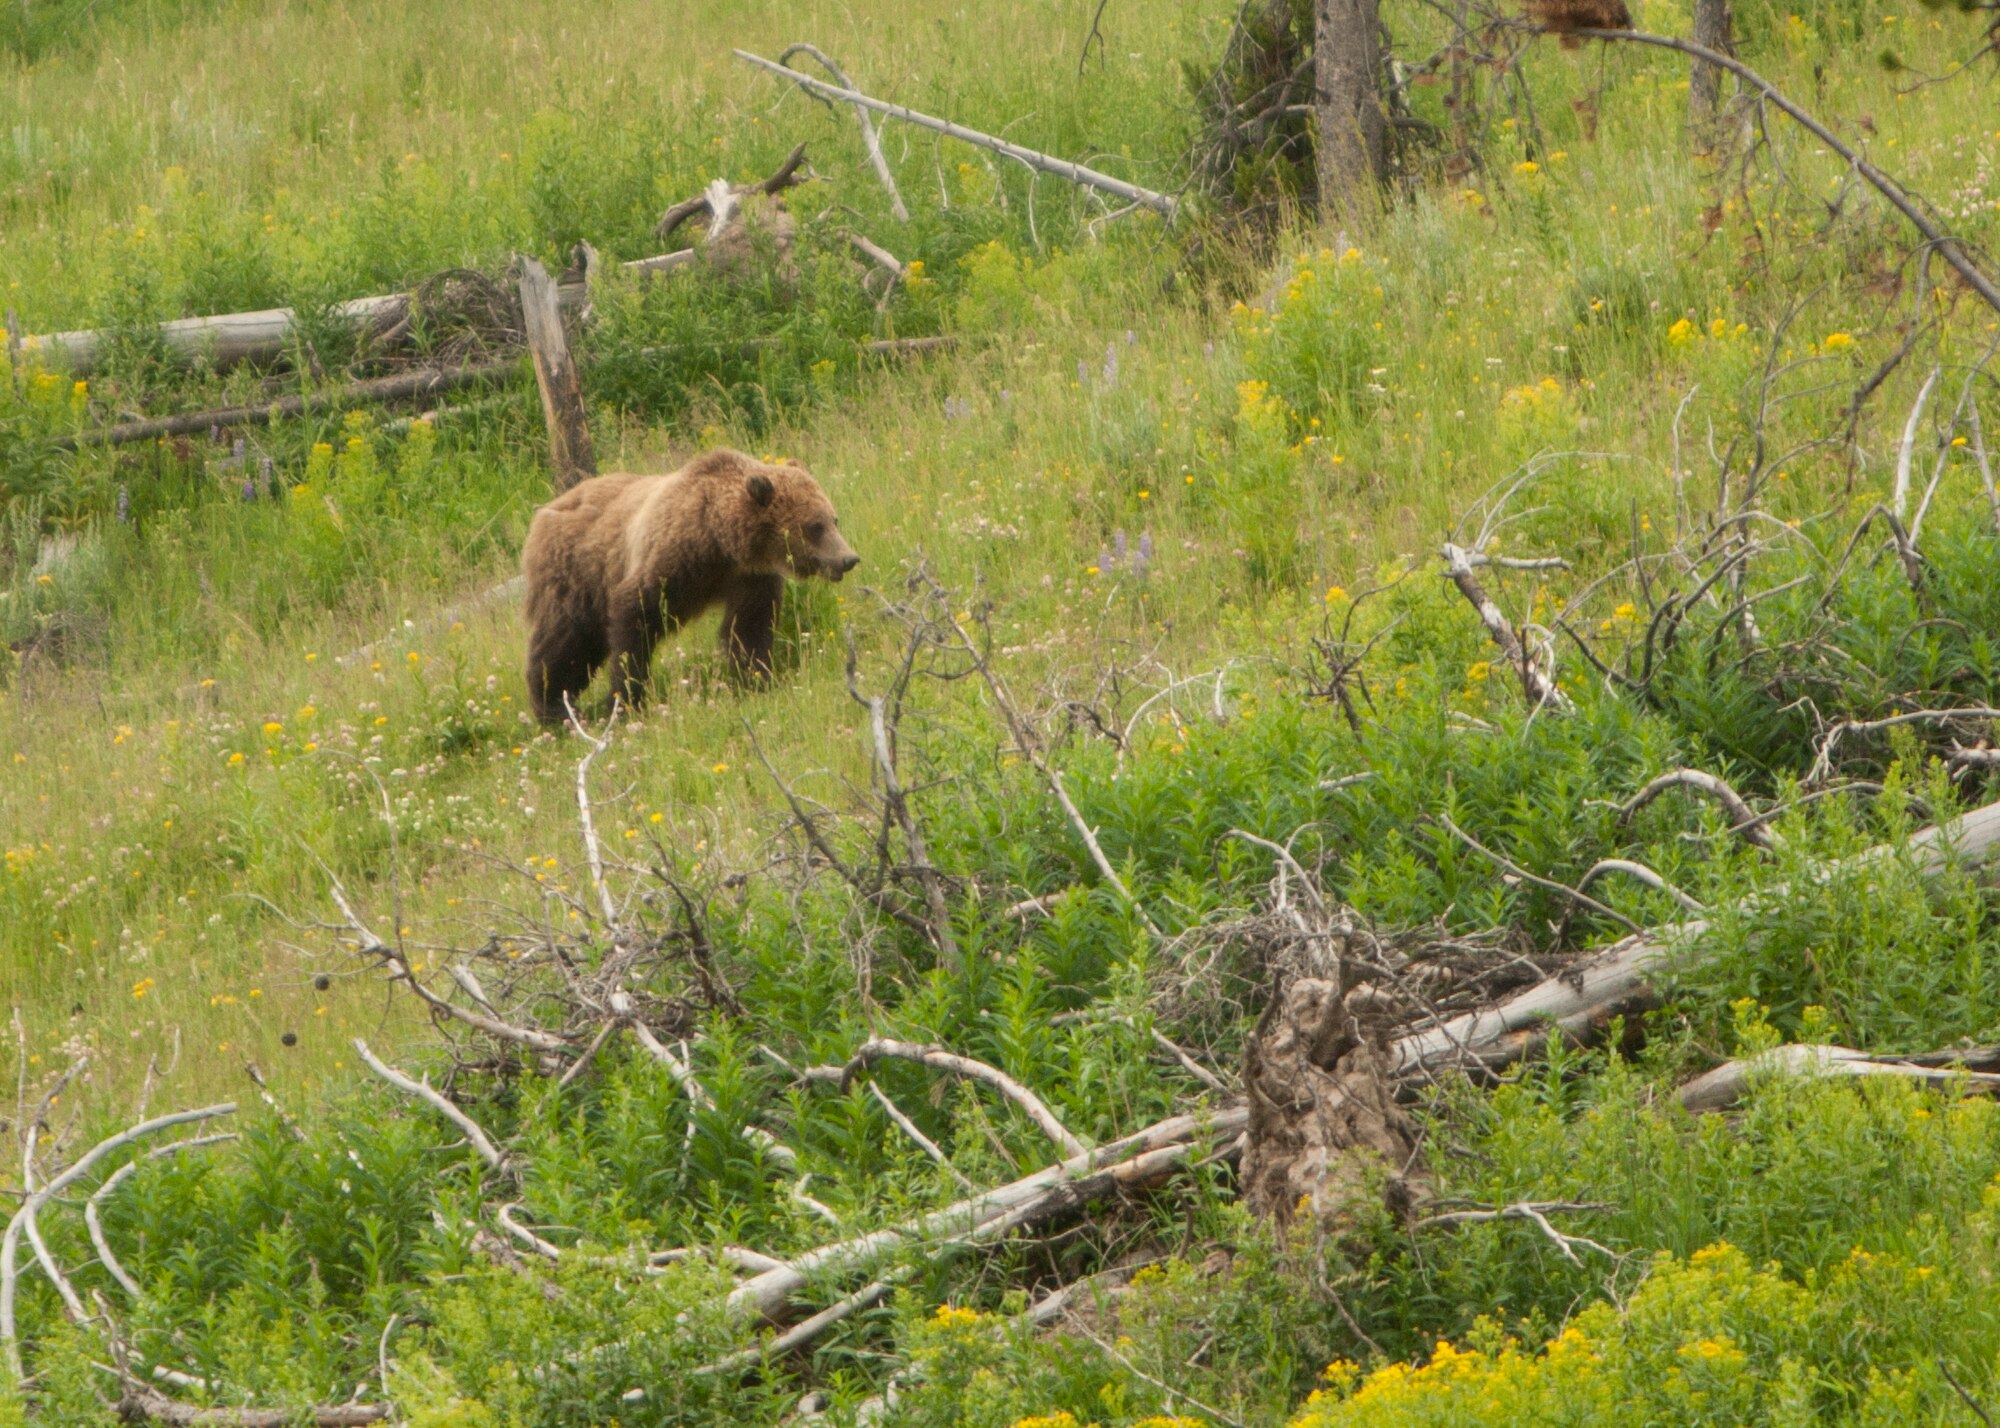 A grizzly bear treks across an open field in Yellowstone National Park, Wyo., July 5, 2015. The bear was sighted just 140 yards away from a group of F.E. Warren Air Force Base Outdoor Recreation trip participants on an exploration of the park.  (U.S. Air Force photo by Lan Kim)